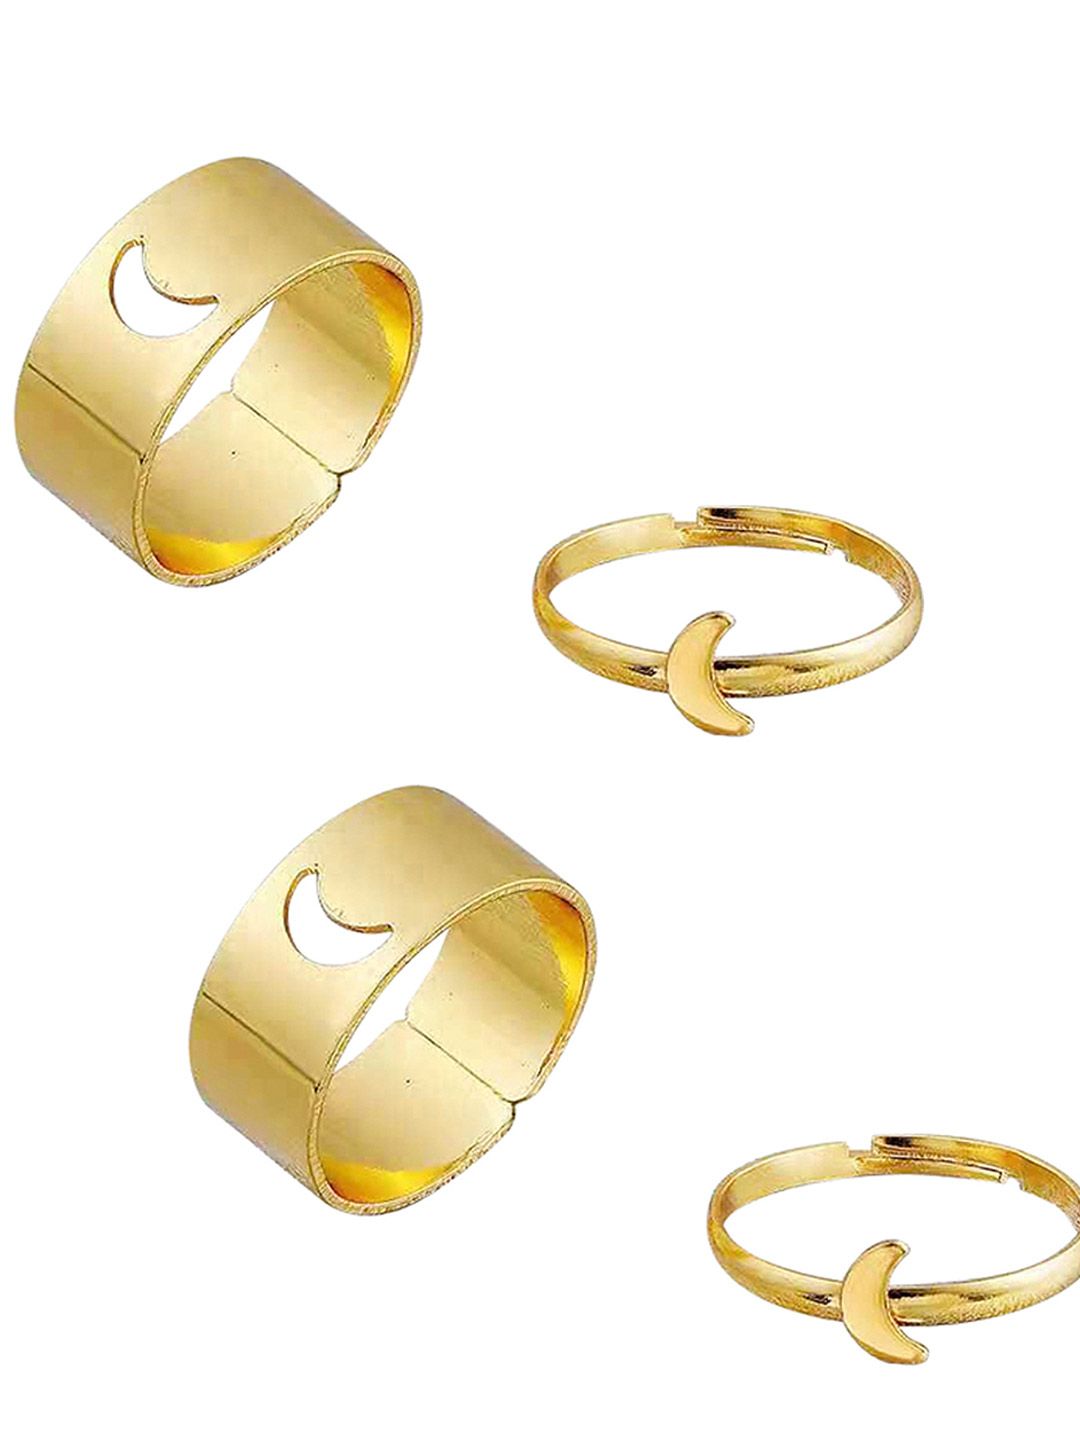 Vembley Set Of 4 Gold-Toned & Plated Half Moon Couple Rings Price in India